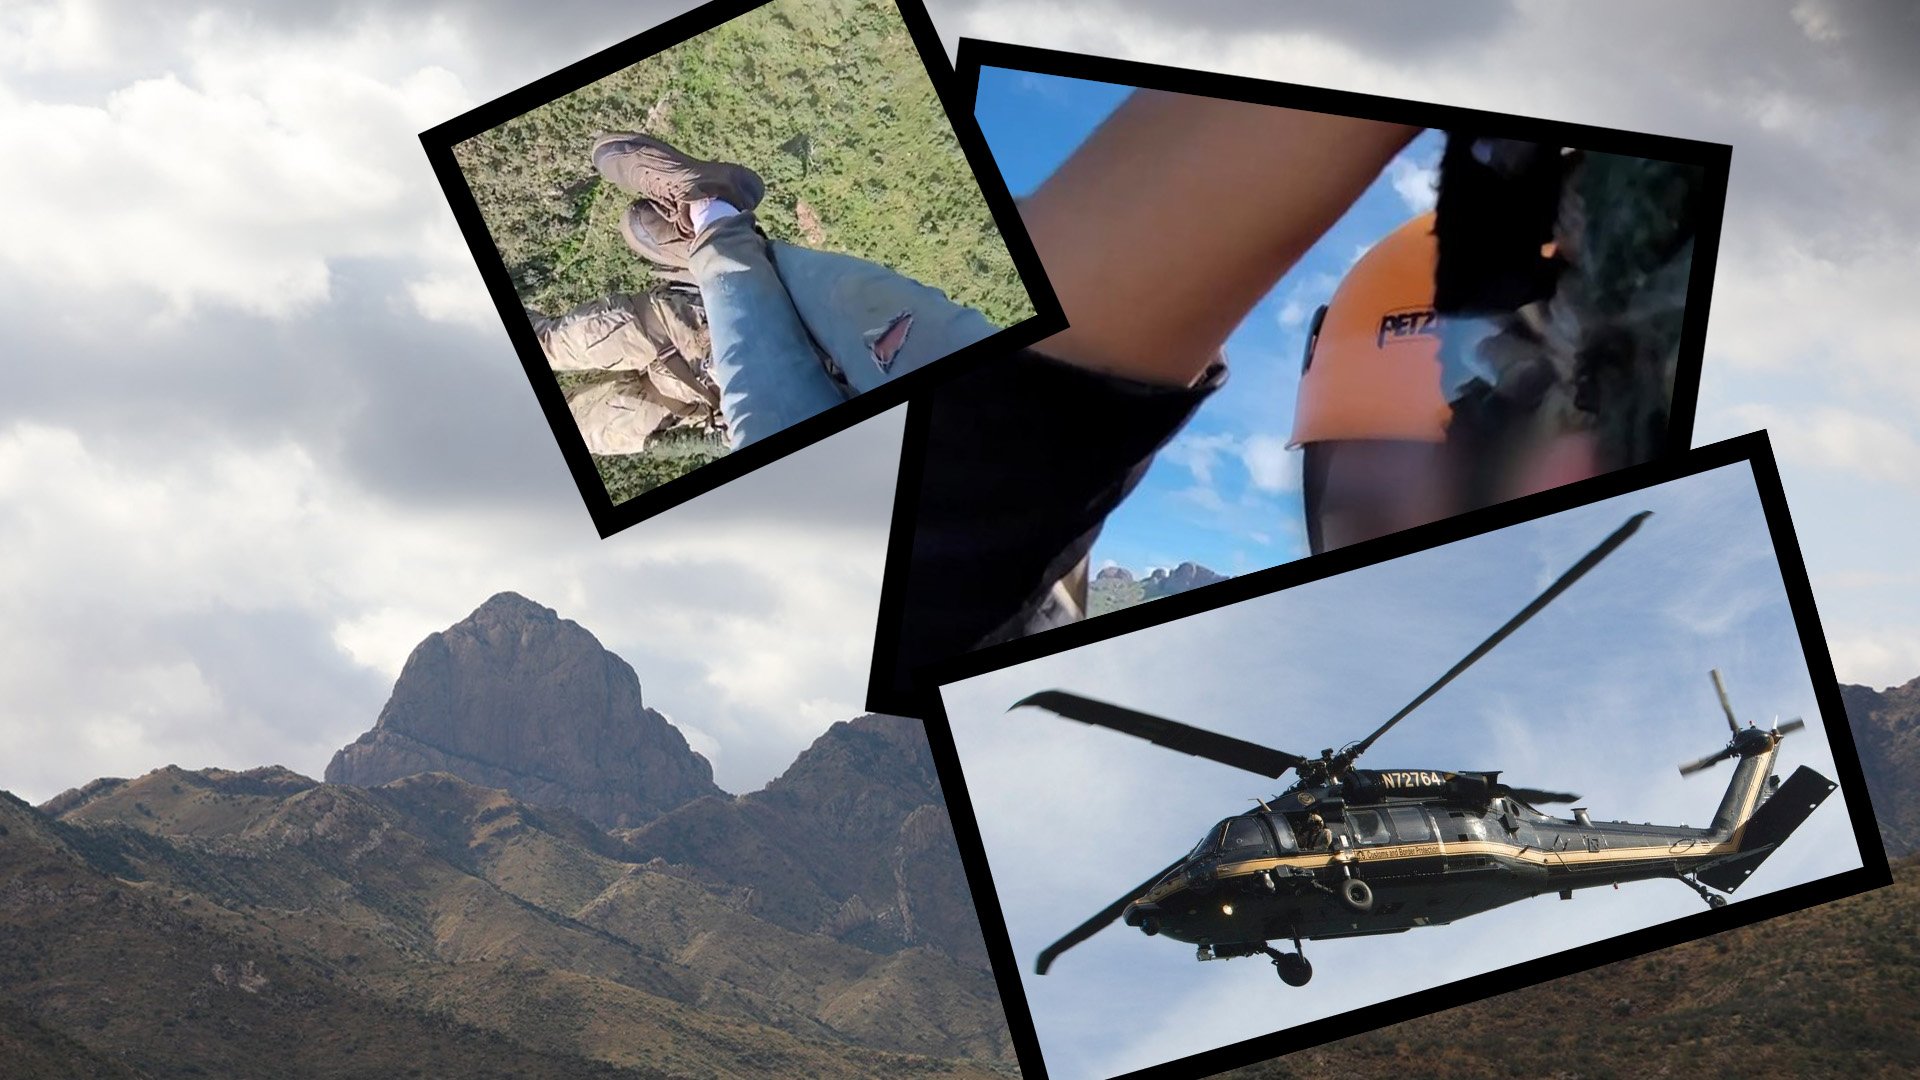 On Aug. 24, 2022, Air and Marine Operations Agents joined elite BORSTAR operators in a daring rescue of an injured migrant from Arizona's monsoon-lashed Baboquivari Mountains. Coffee or Die Magazine composite.